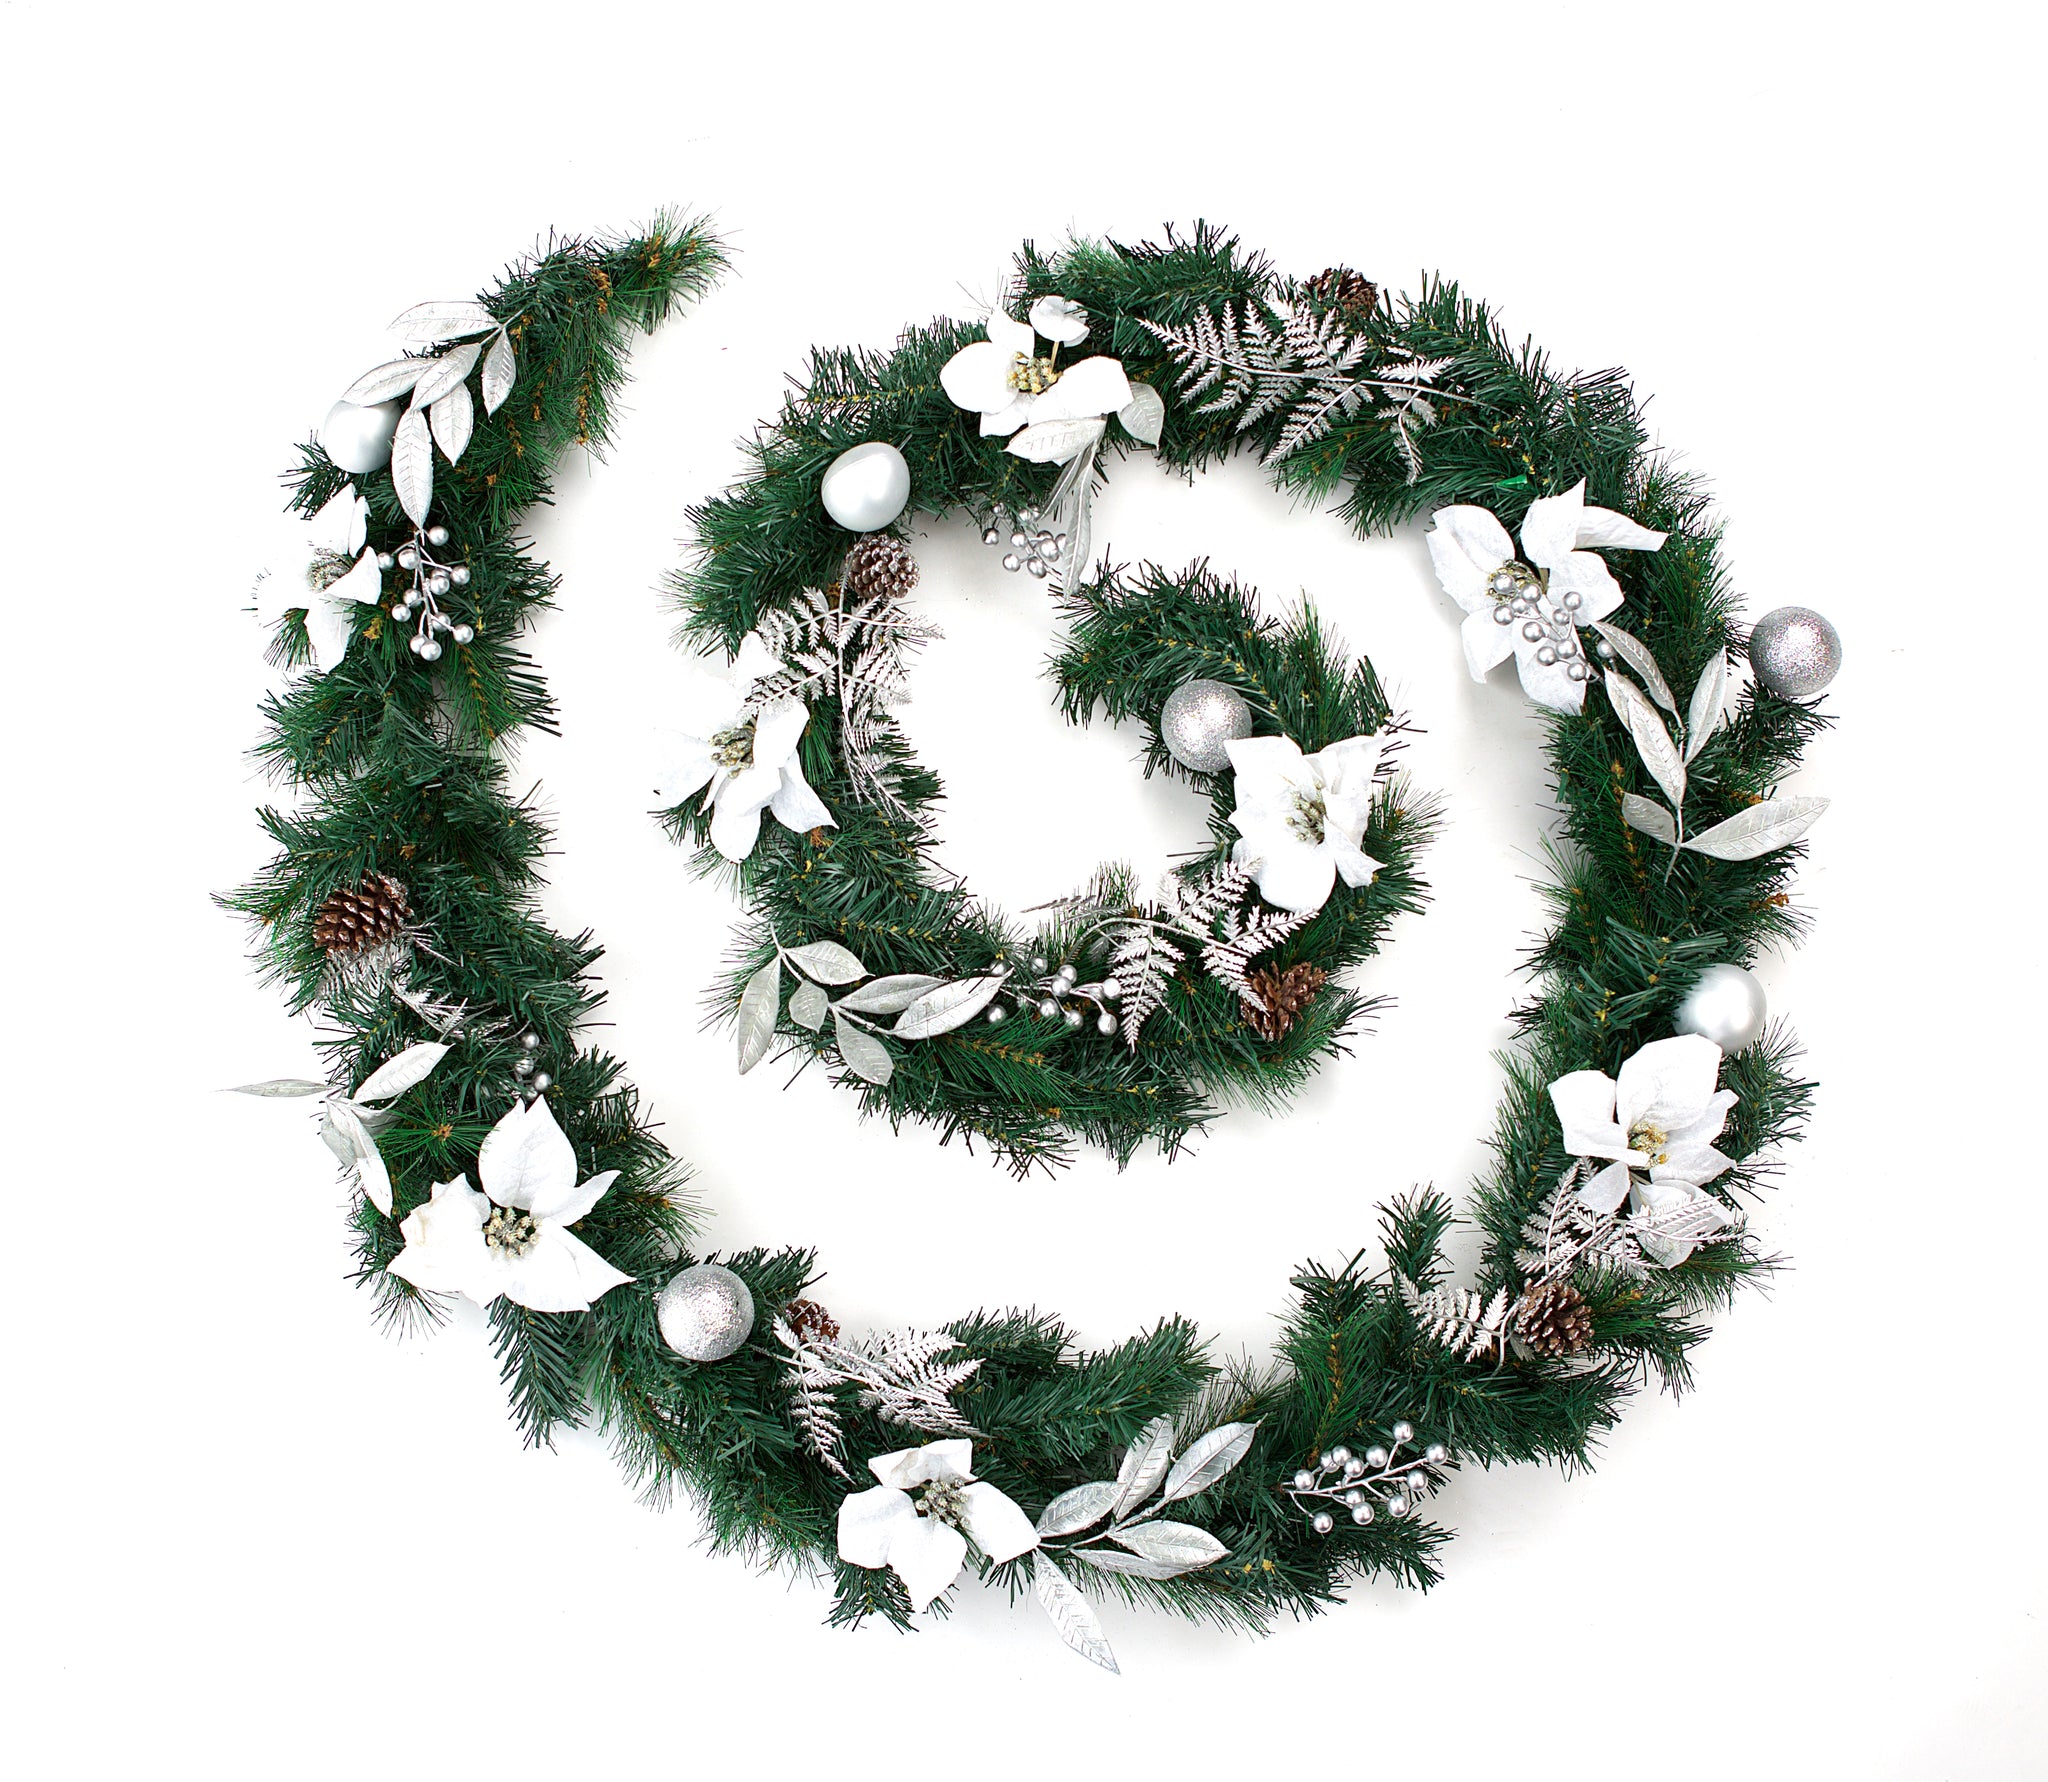 6ft - 9ft or 12ft White/Silver Christmas Garland - Optional Lights